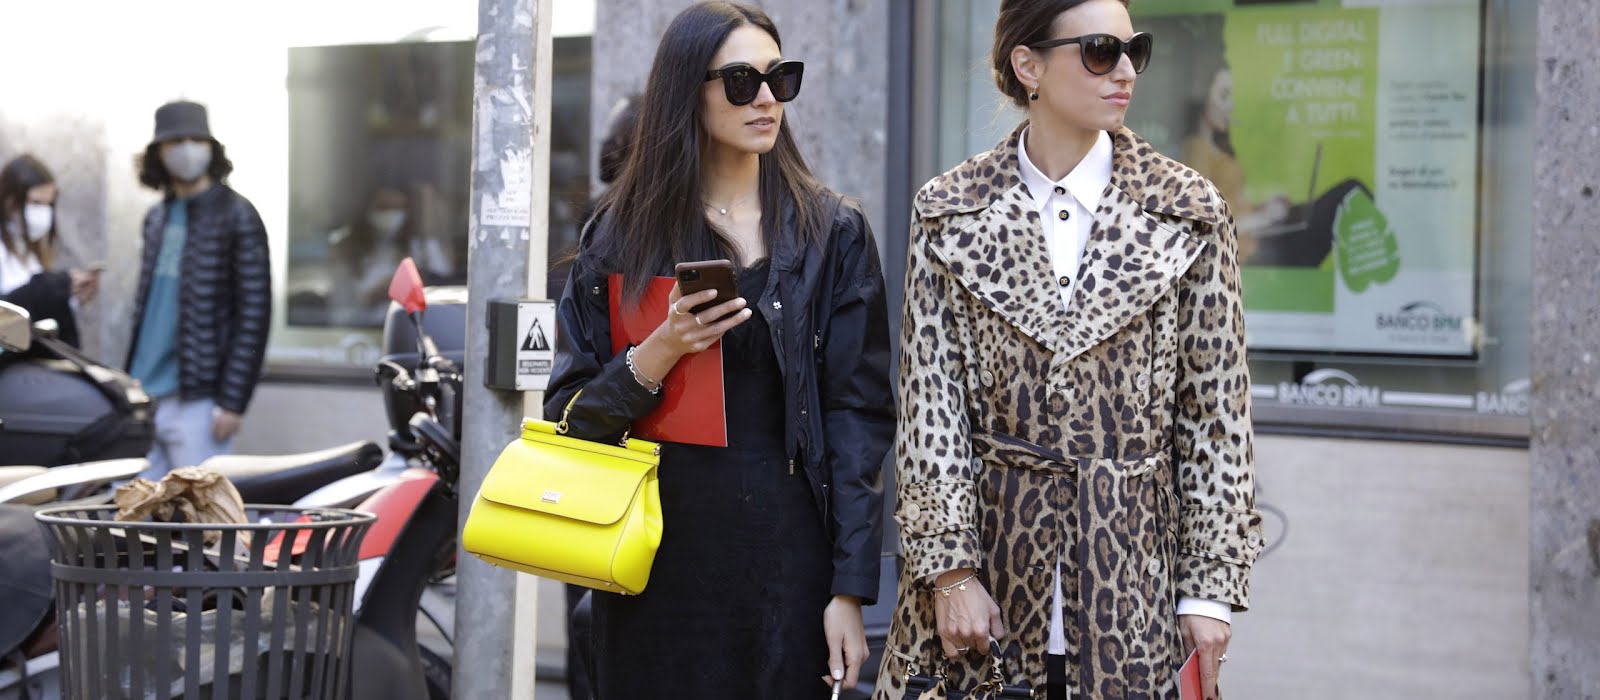 The best street style from Milan Fashion Week to inspire your back-to-work wardrobe